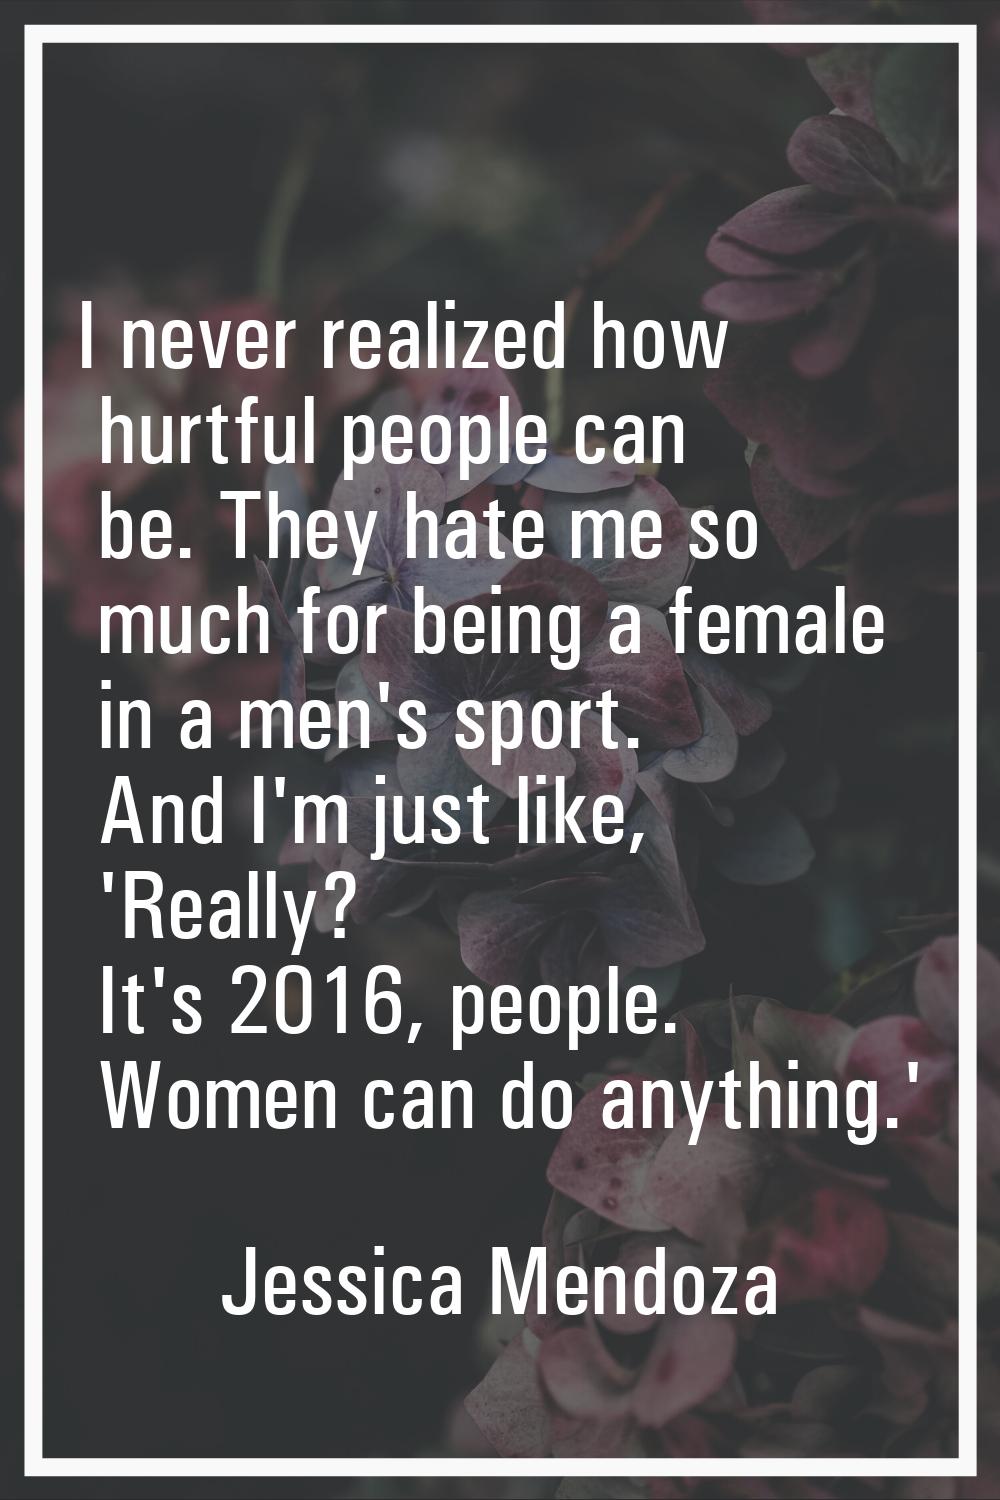 I never realized how hurtful people can be. They hate me so much for being a female in a men's spor